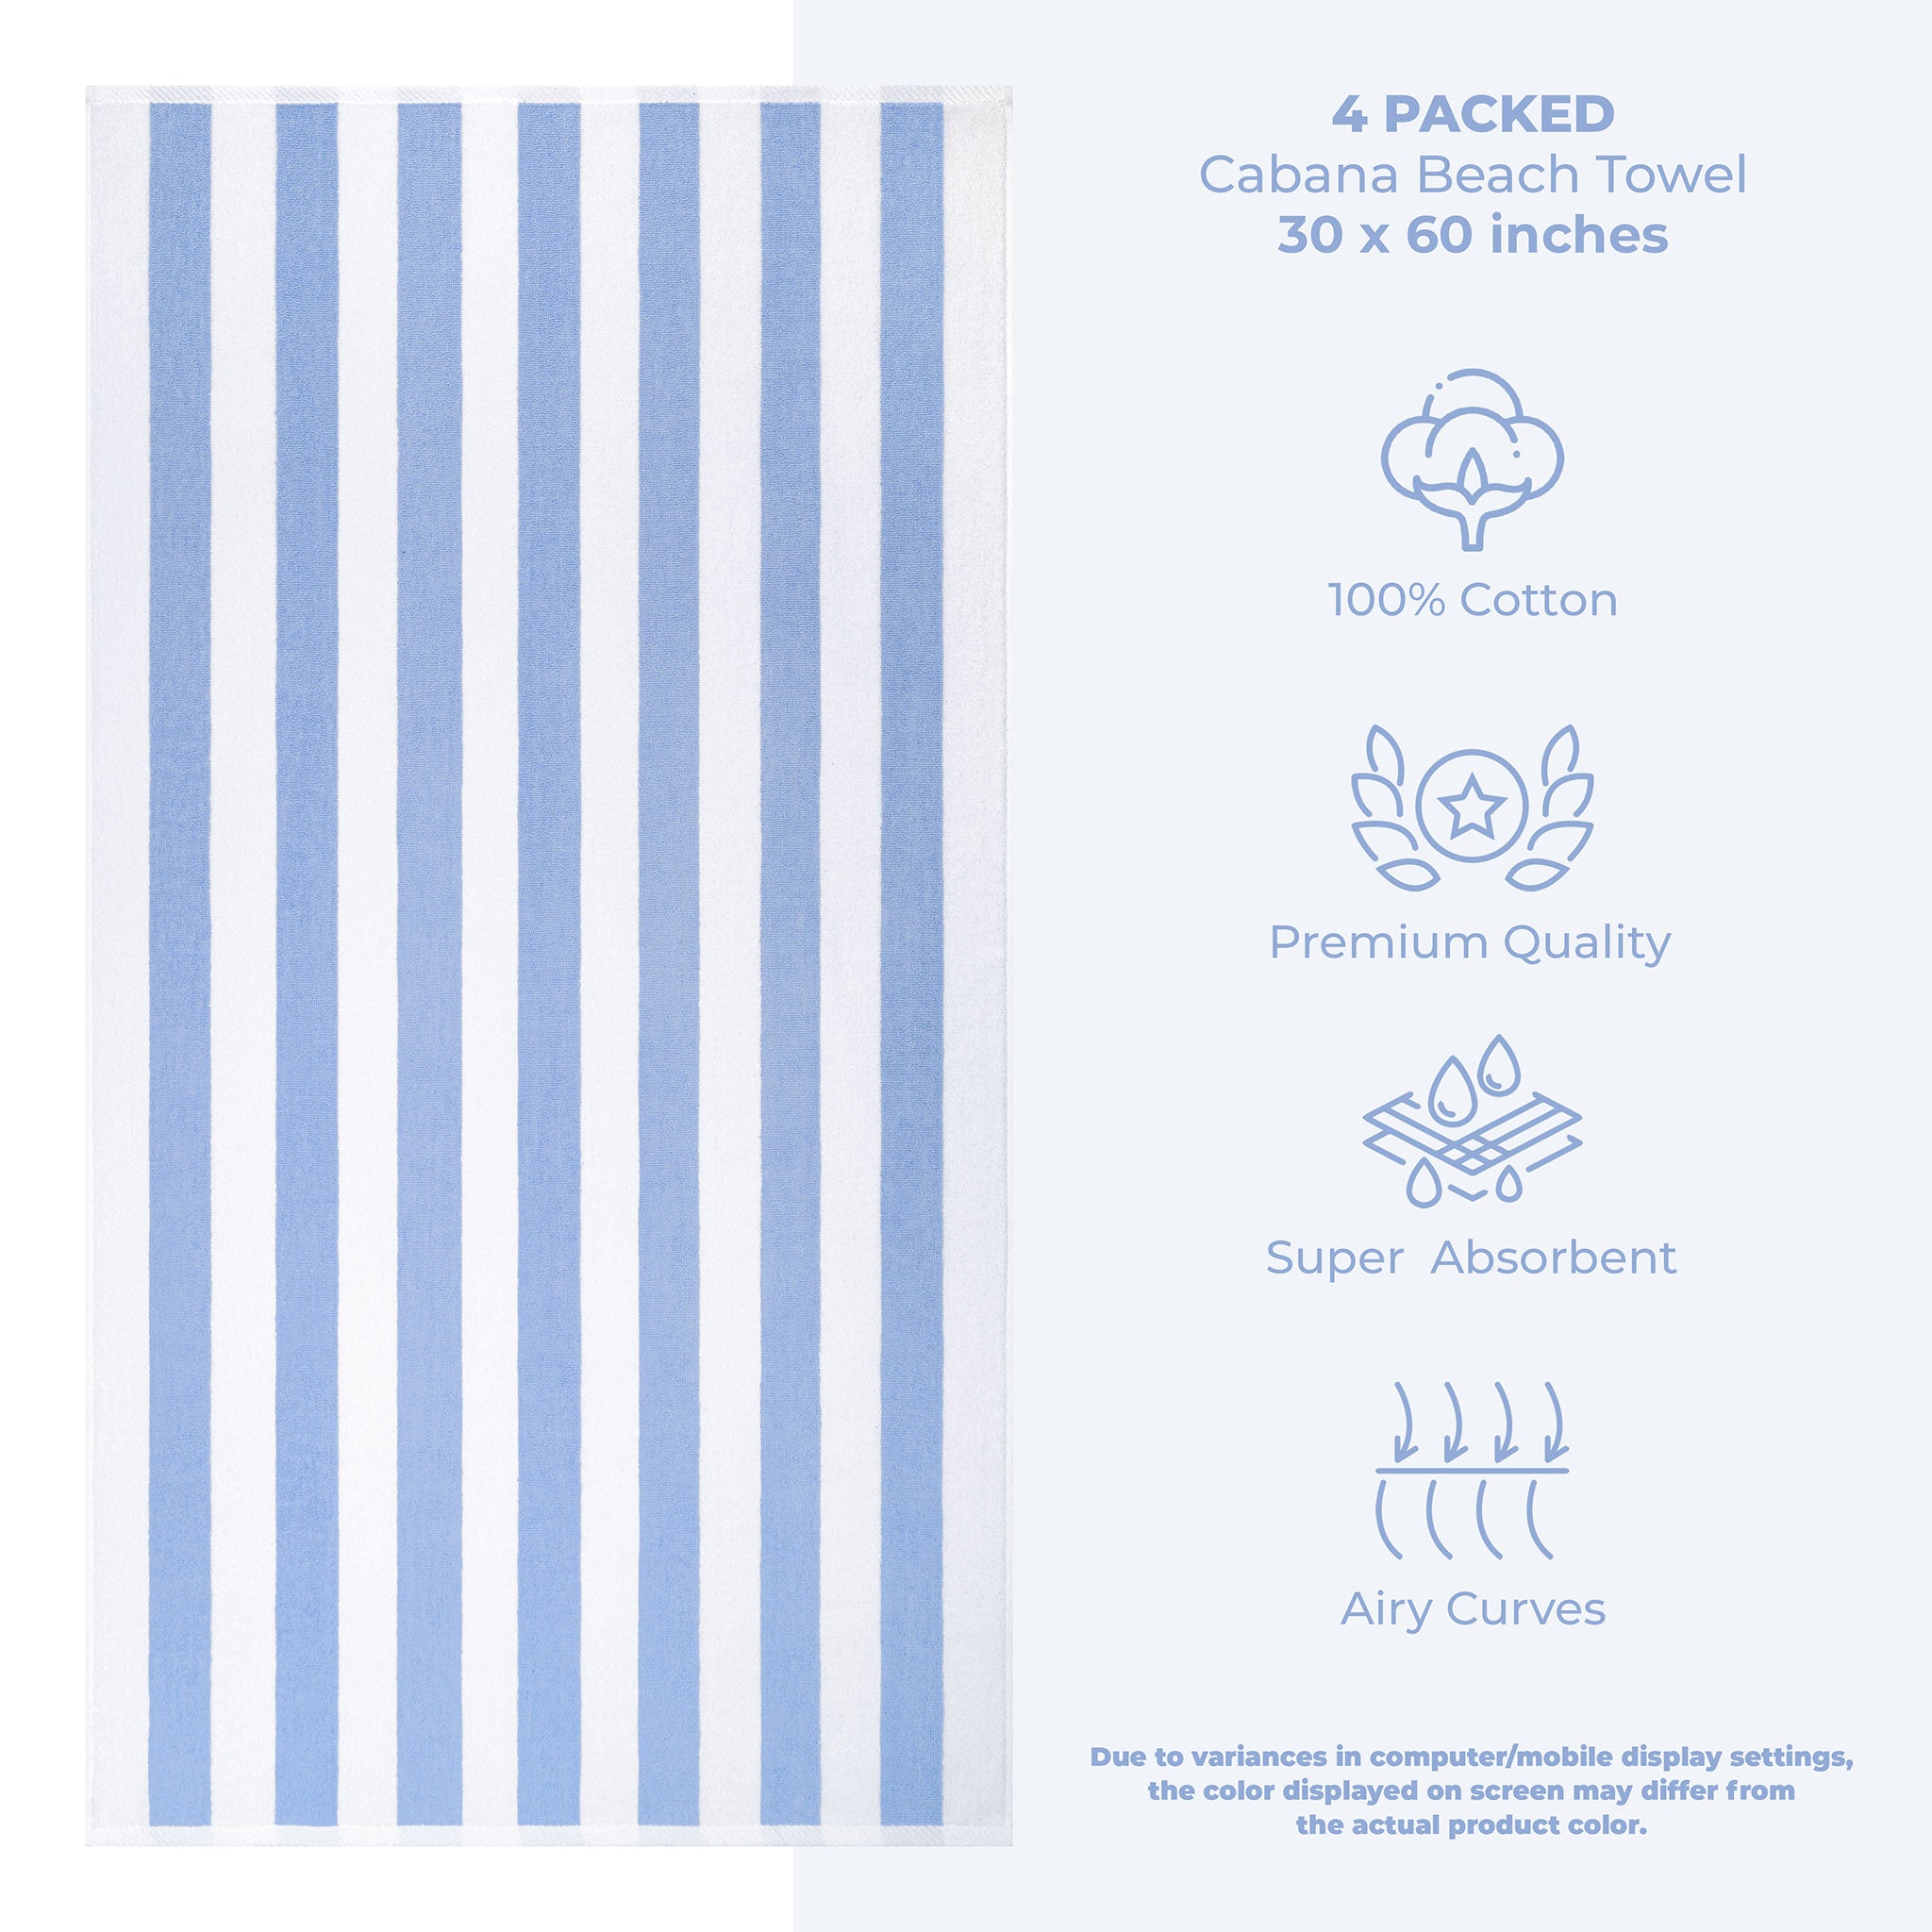 American Soft Linen 100% Cotton 4 Pack Beach Towels Cabana Striped Pool Towels -sky-blue-3